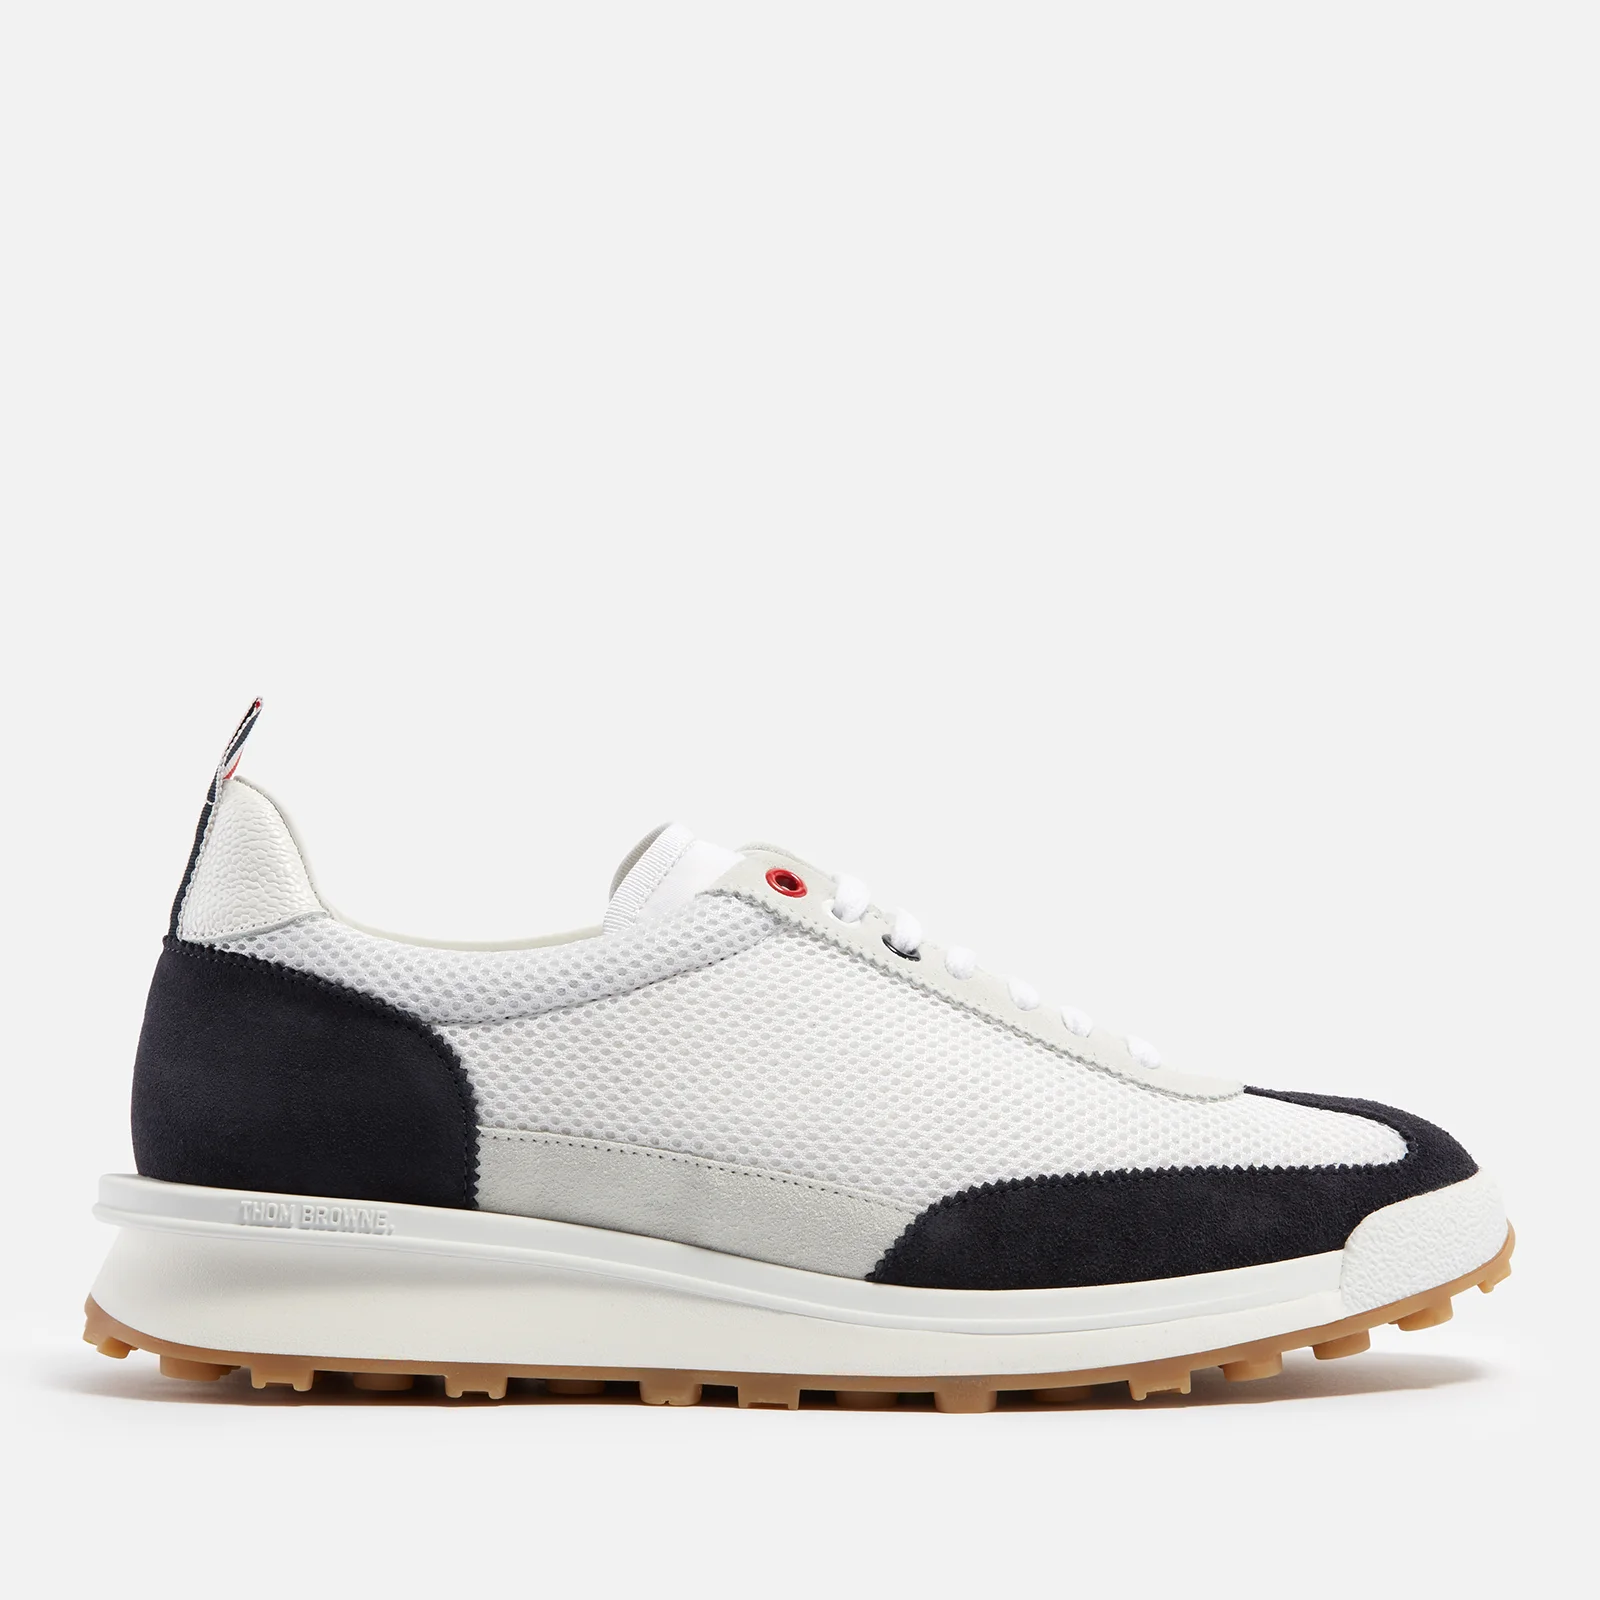 Thom Browne Men's Suede and Mesh Trainers - UK 7 Image 1